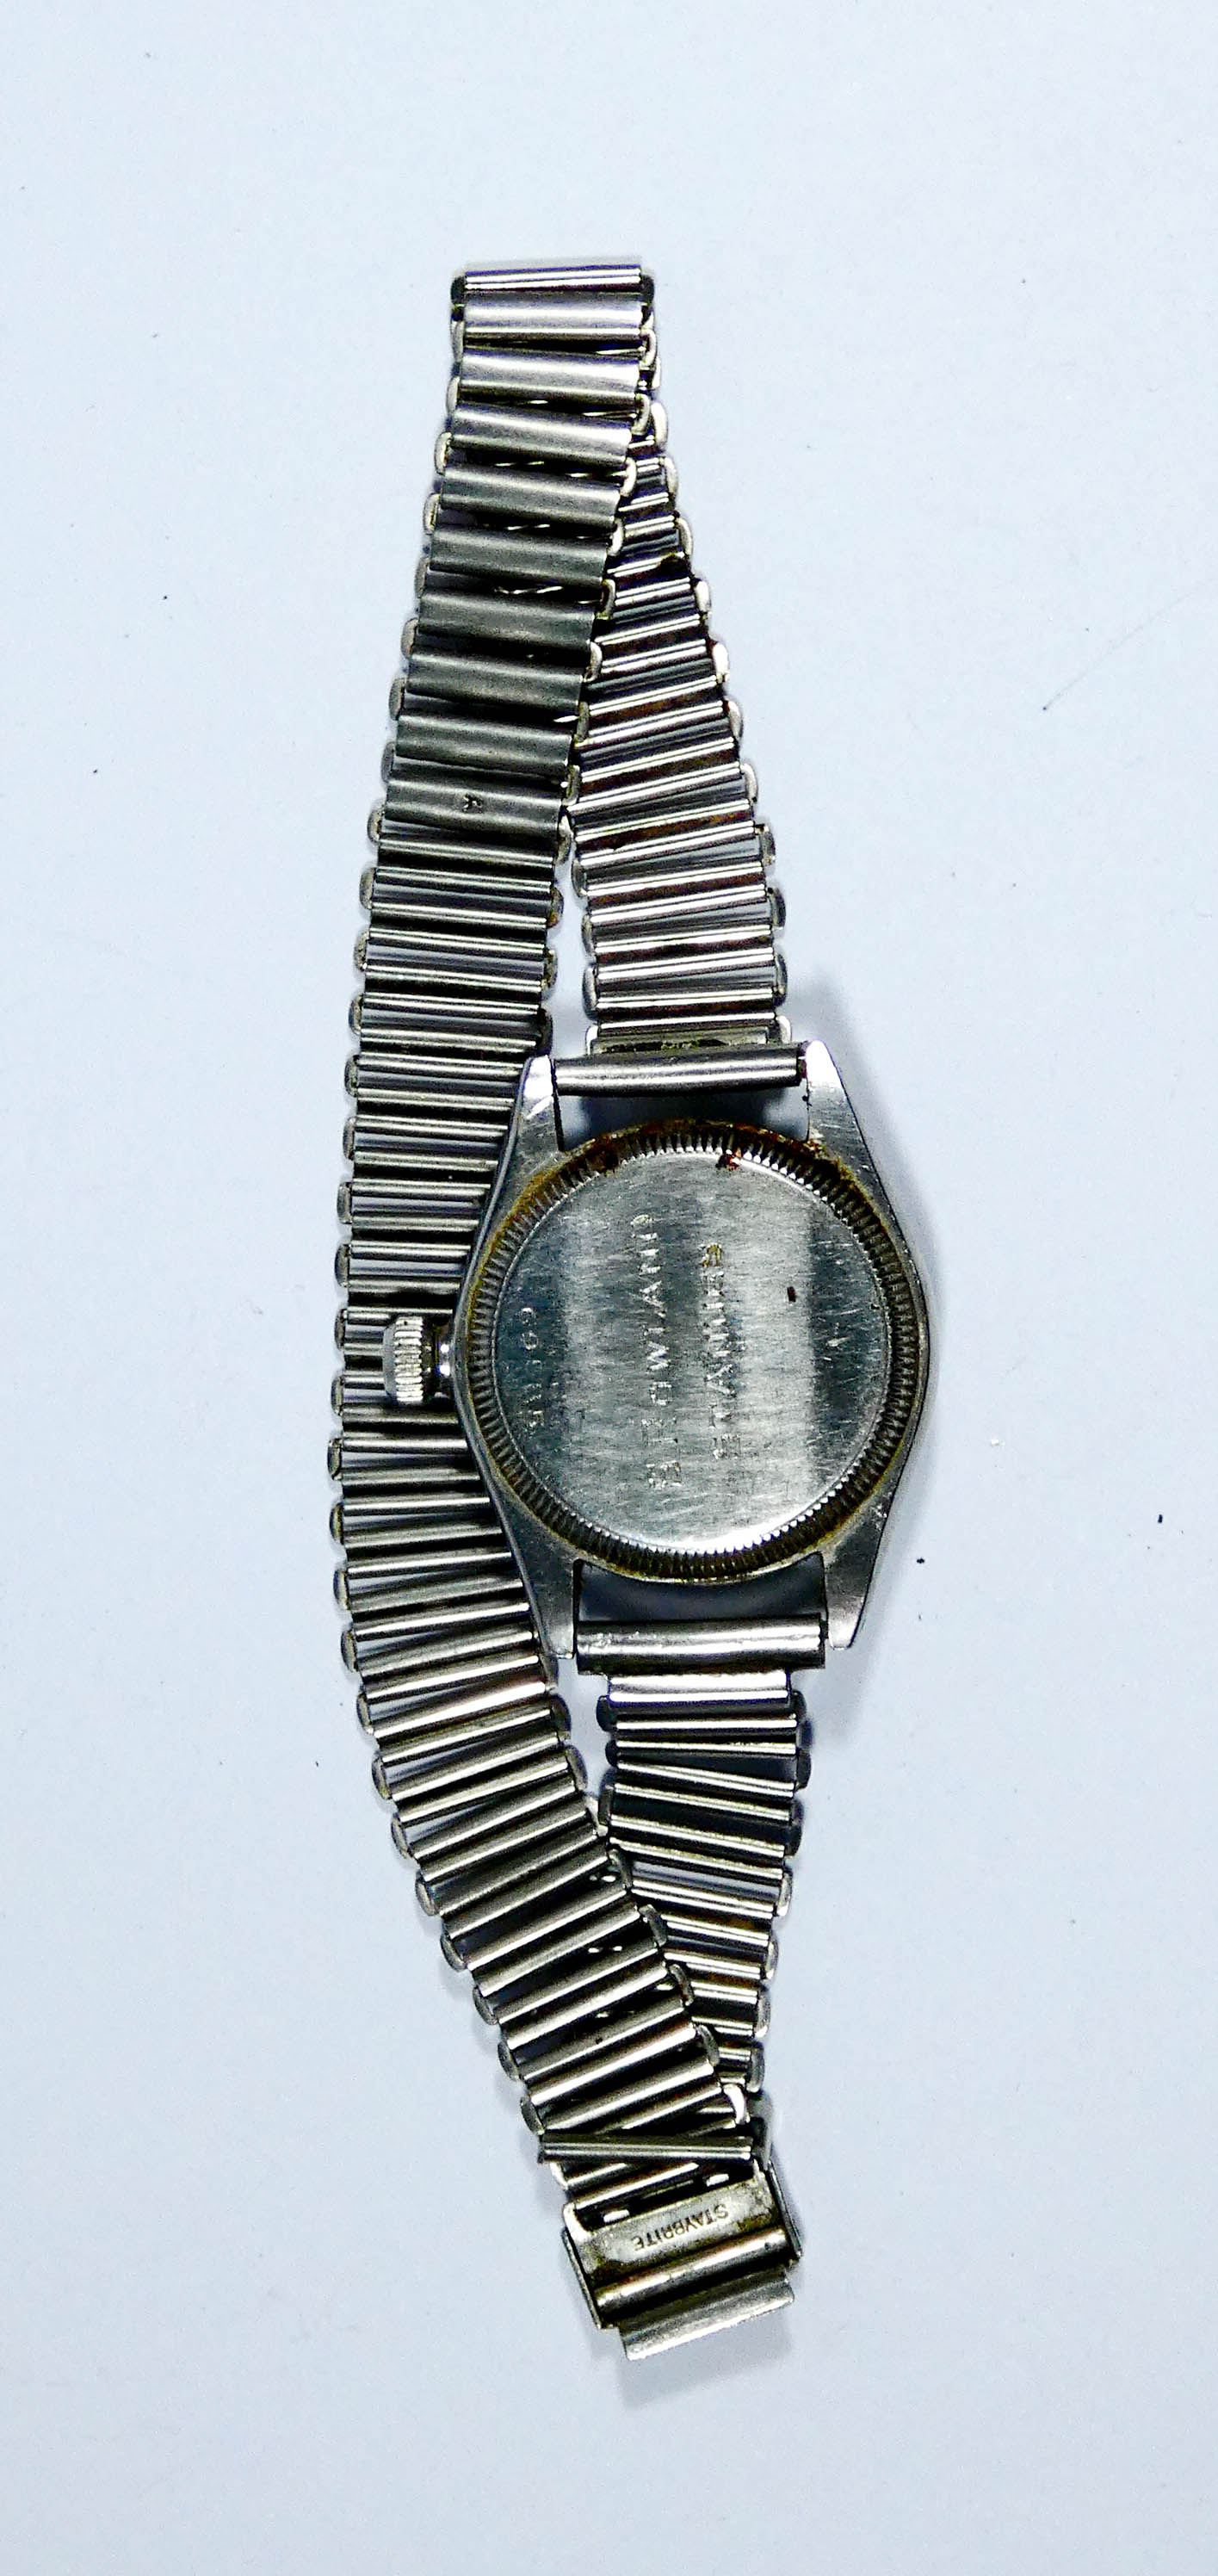 1930's vintage Rolex Oyster chronometer watch, stainless steel case, dial signed Sam Lyon Junr. - Image 2 of 2